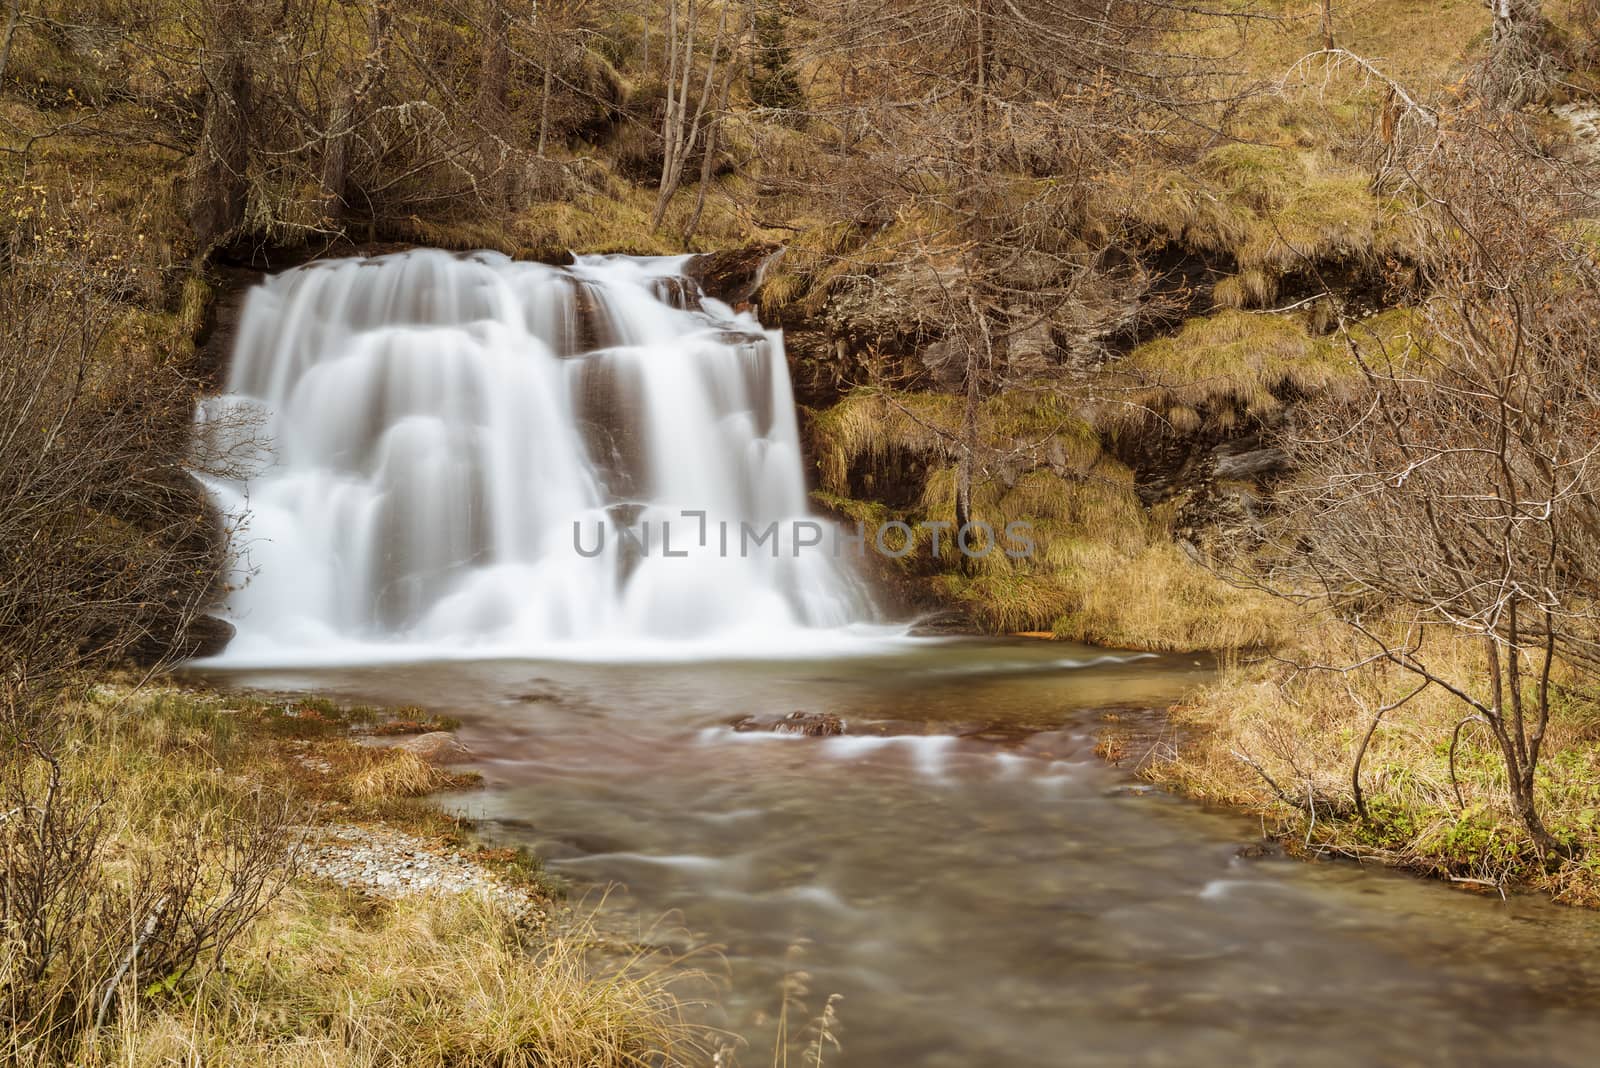 Waterfall in the forest, Devero Alp by Mdc1970